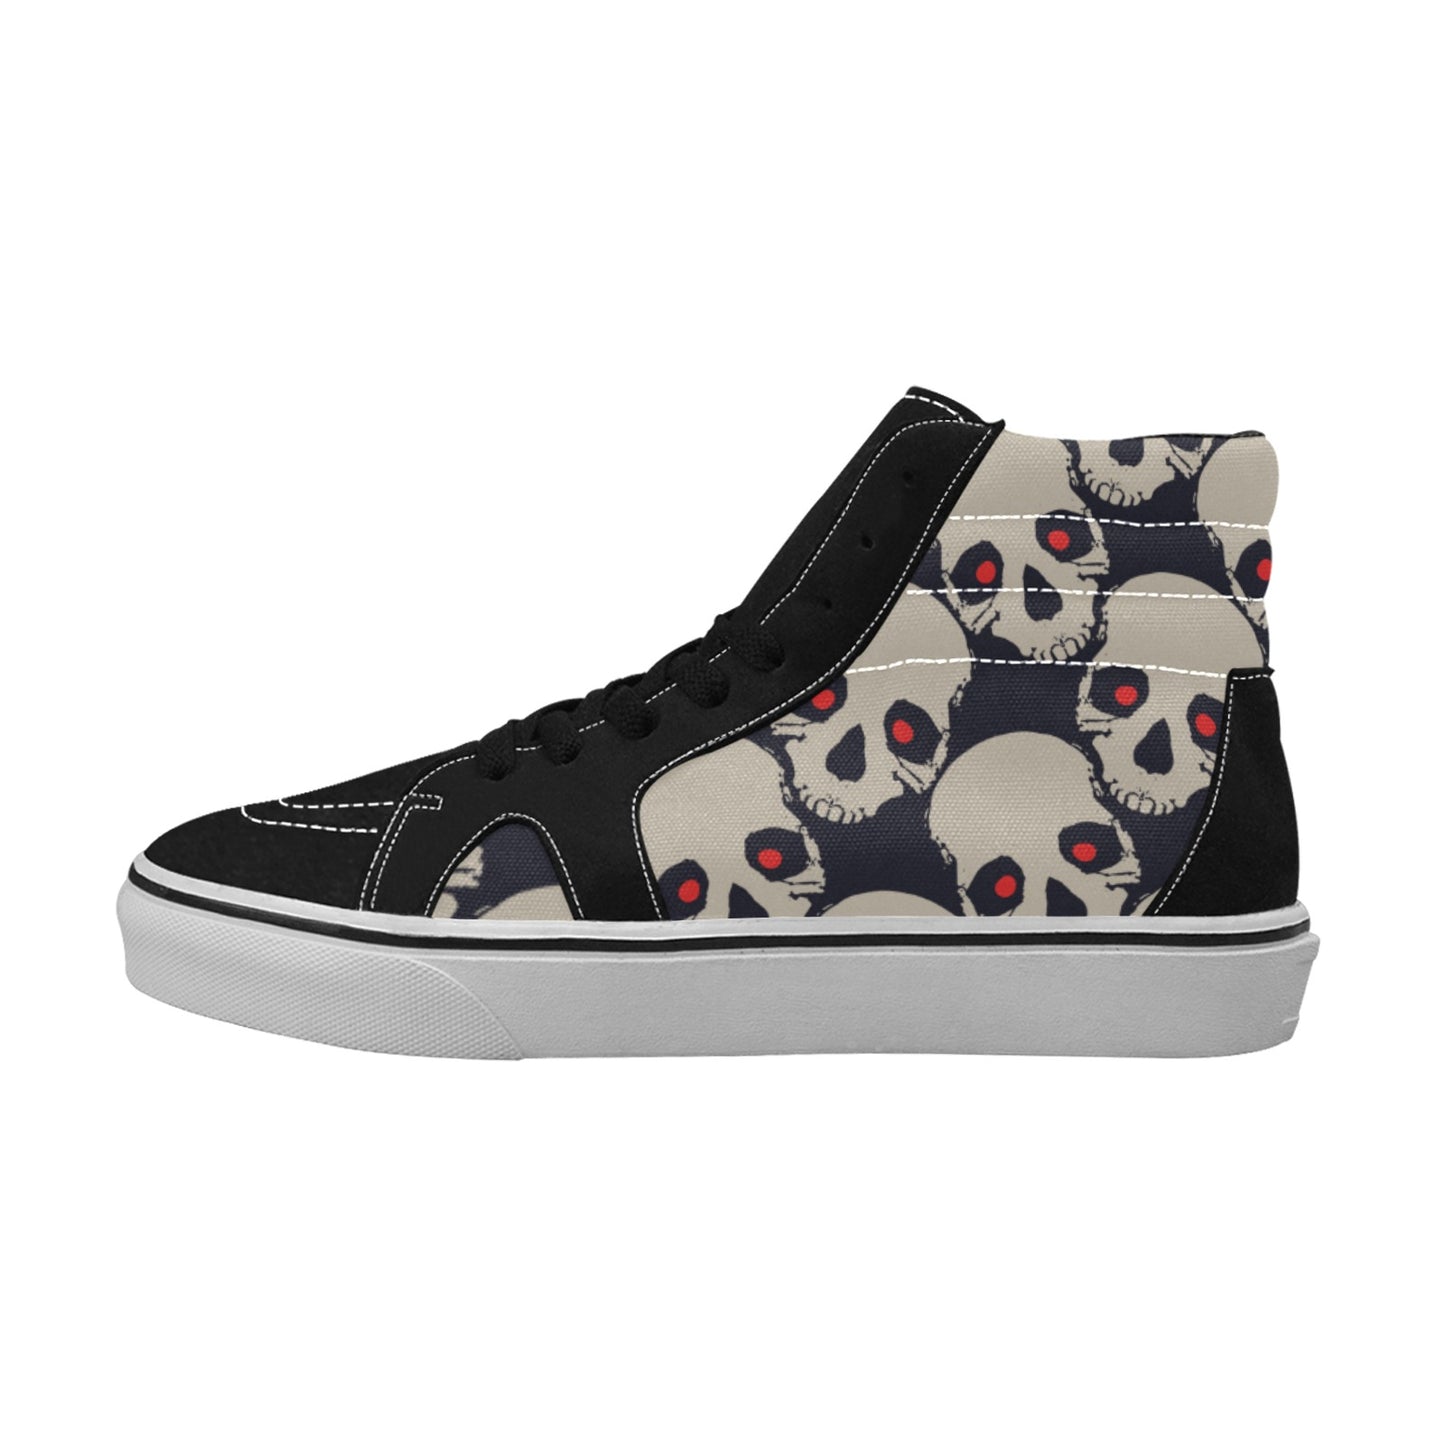 Red Eyed Skulls High Top Canvas Shoes